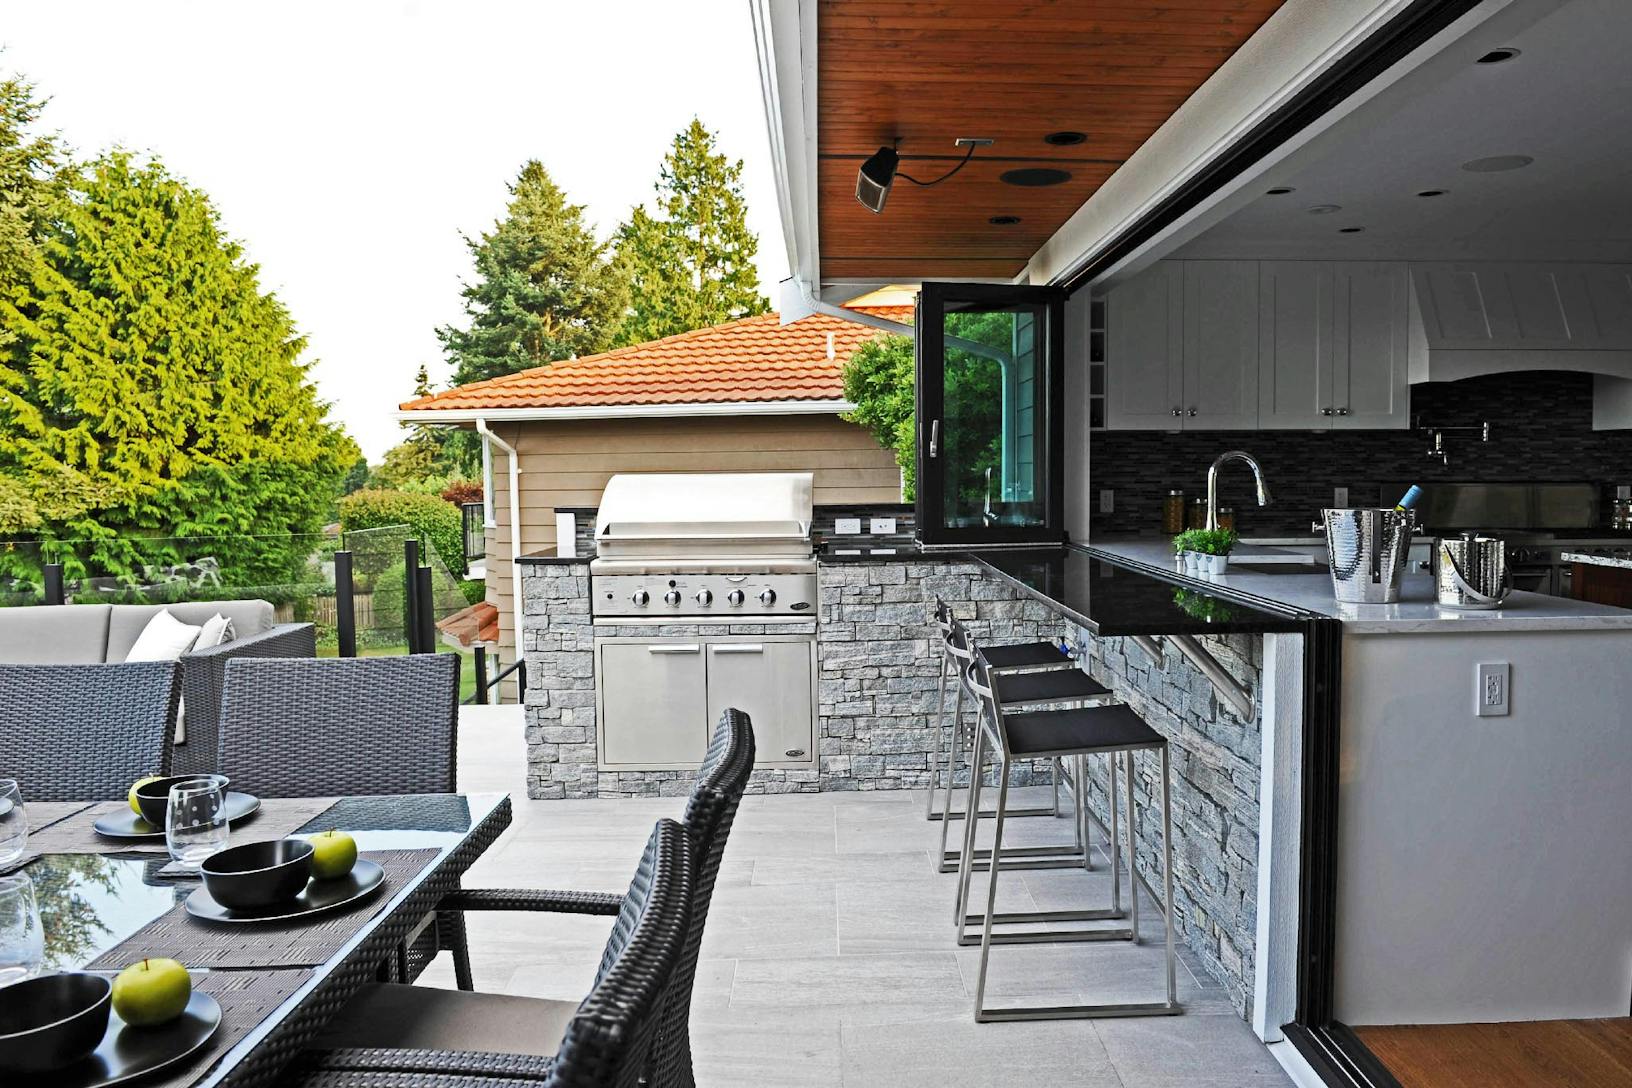 A window/door combination designed for a modern indoor outdoor kitchen and dining area